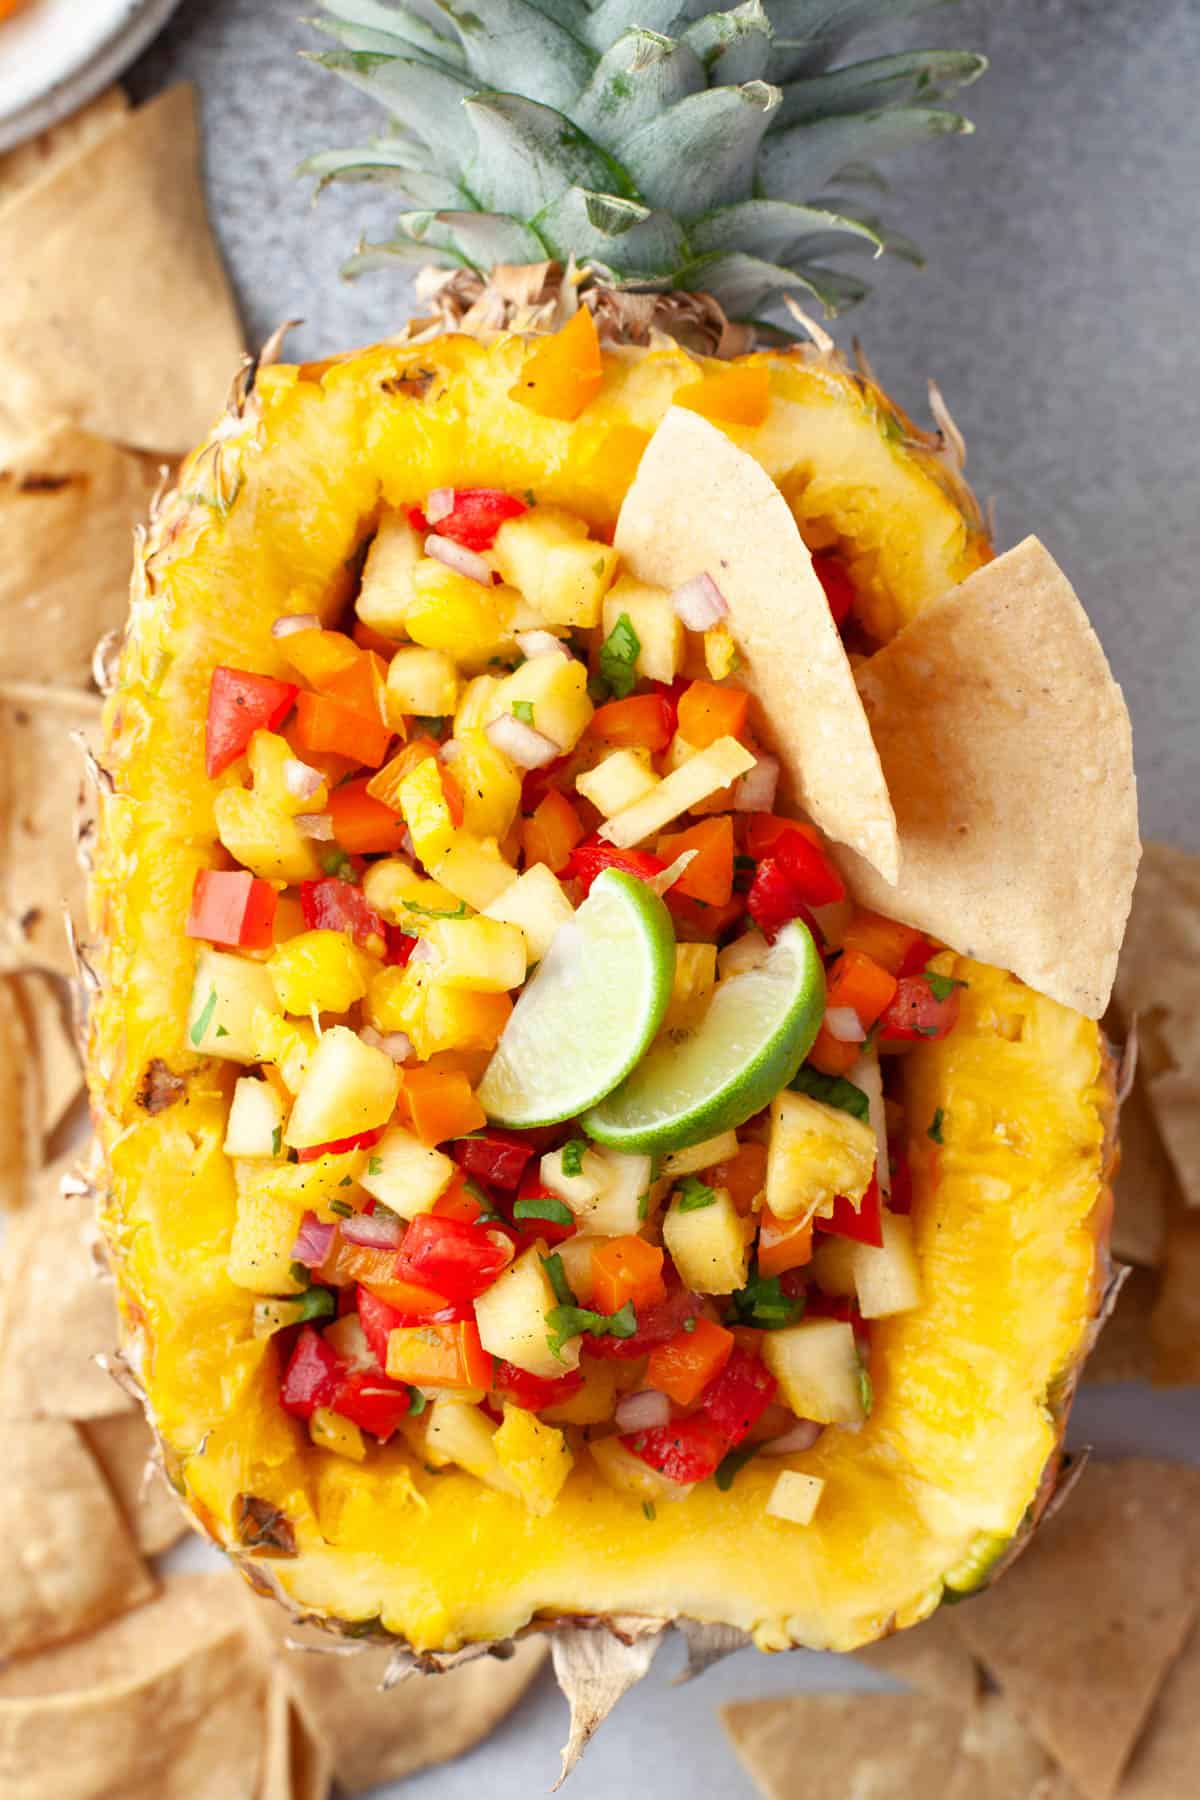 A hollowed out pineapple with pineapple salsa in it.